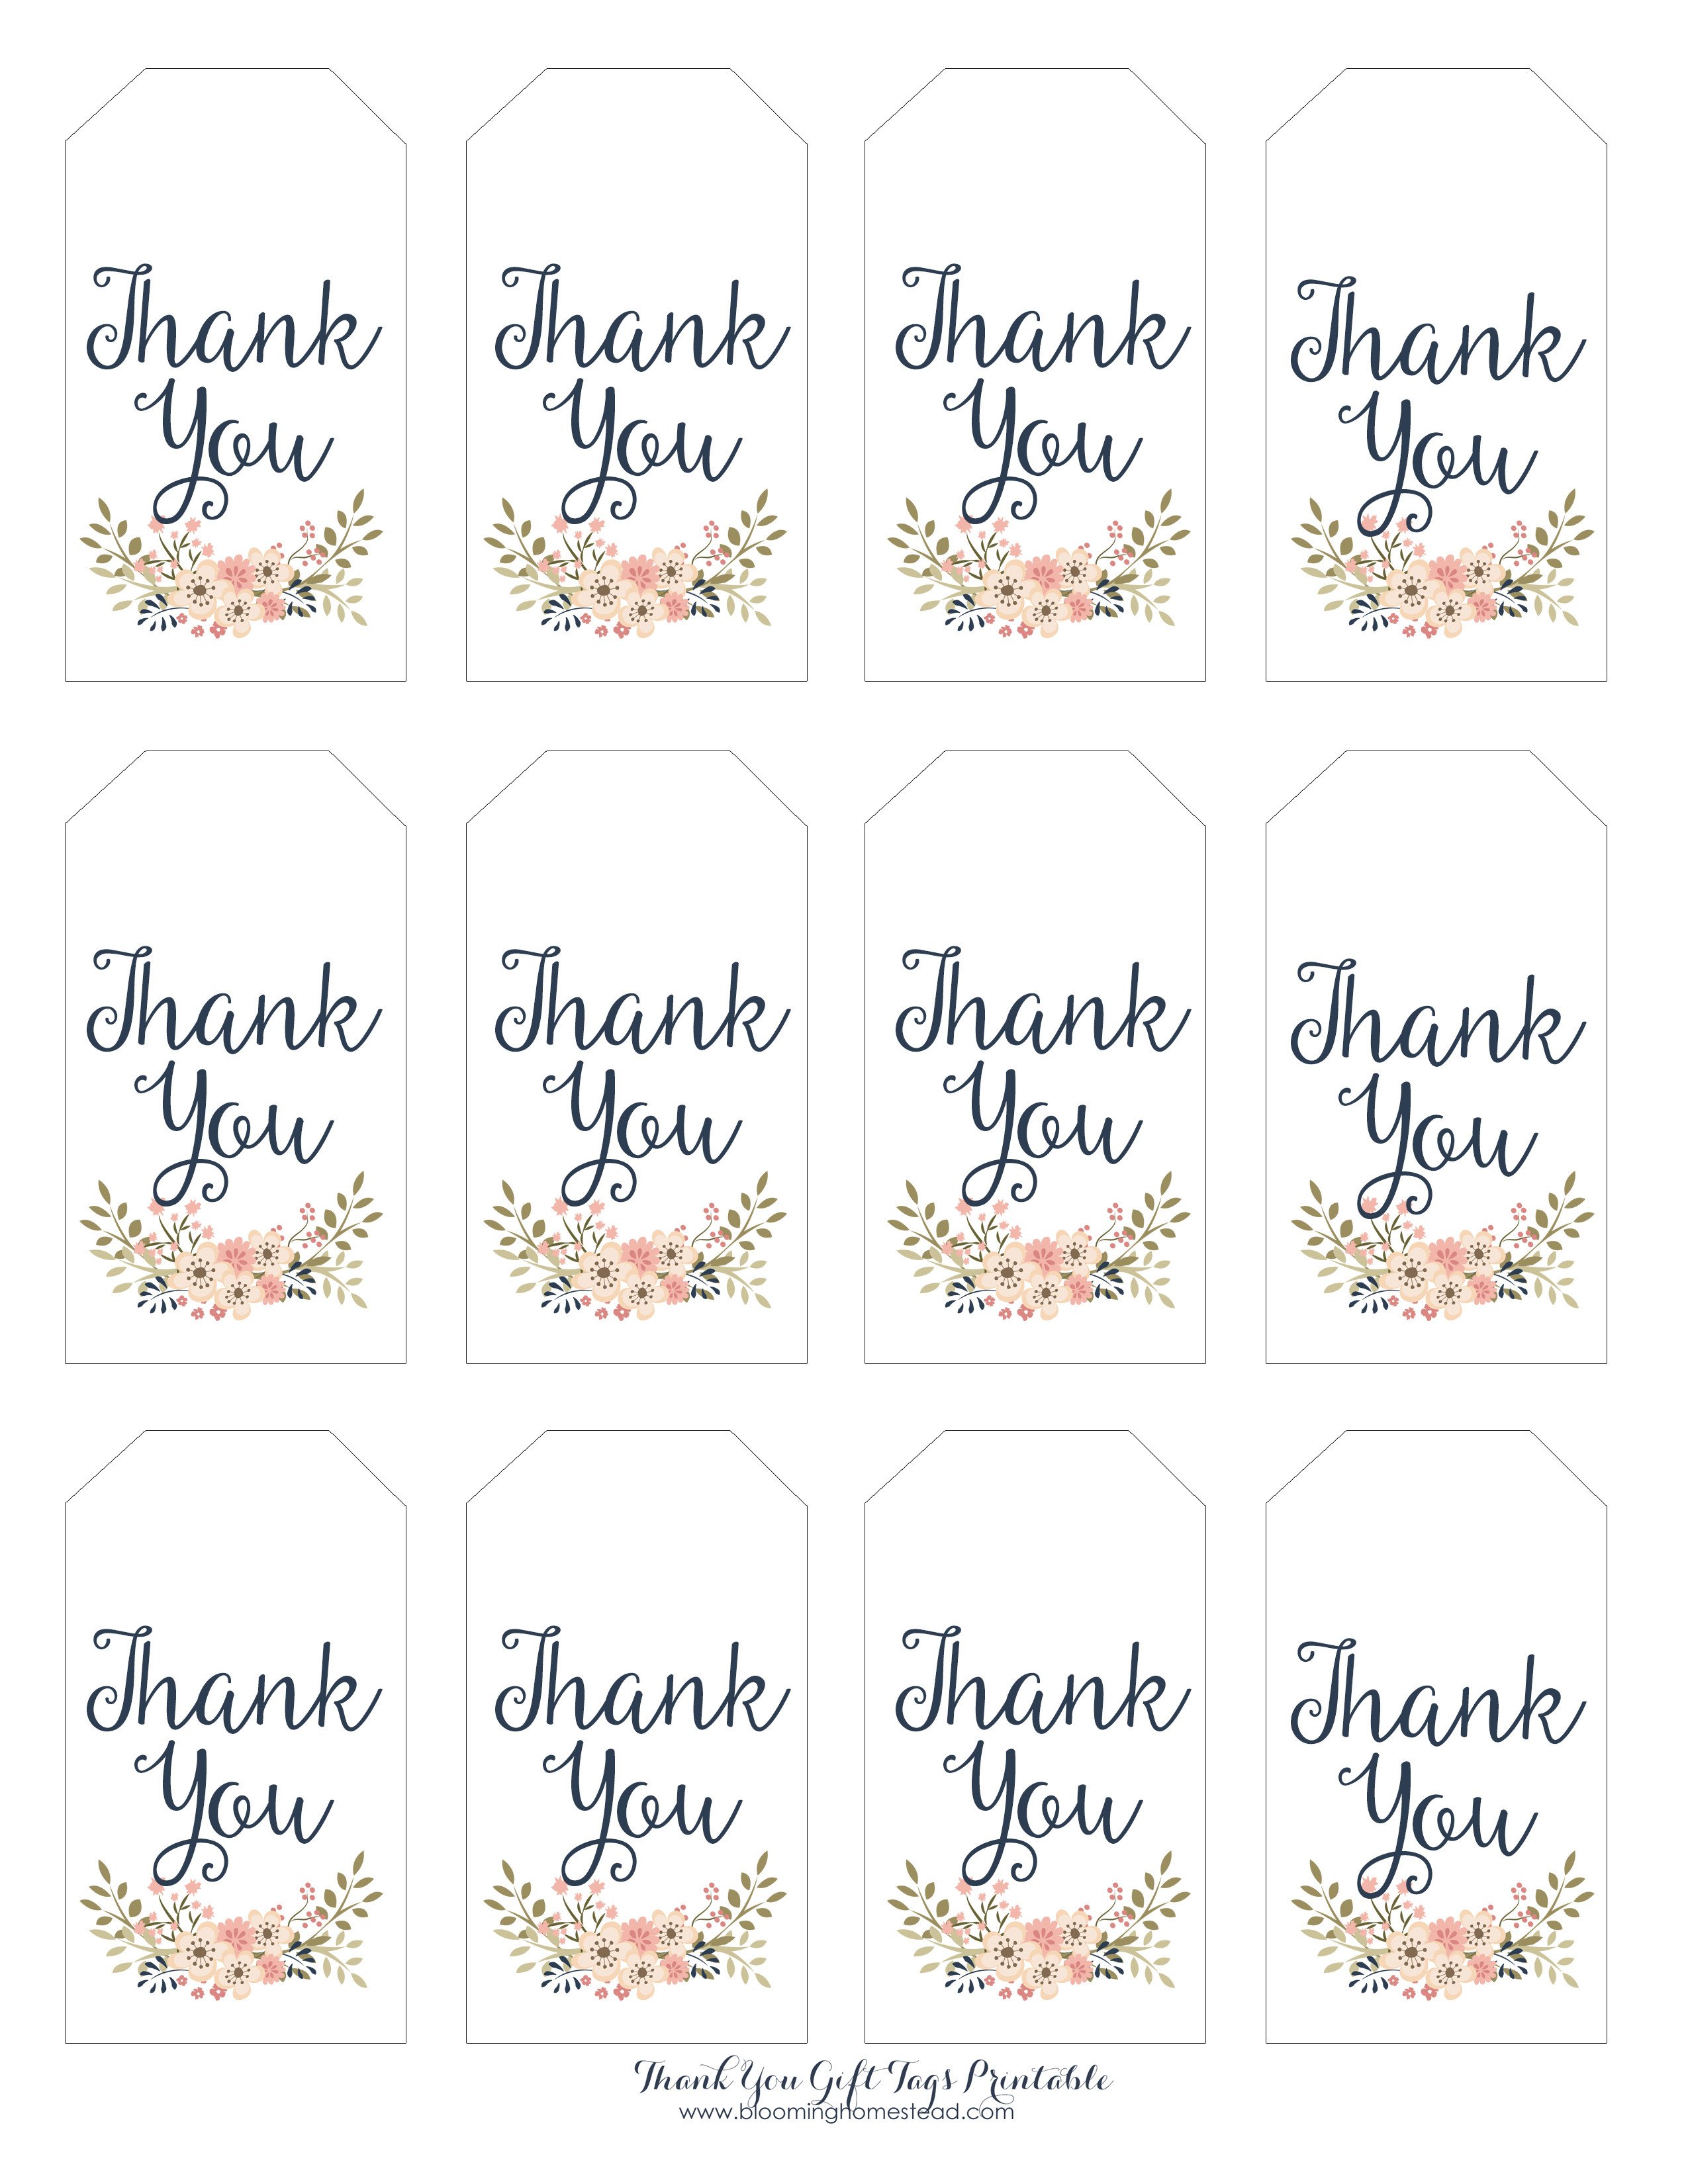 Thank You Gift Tags Blooming Homestead